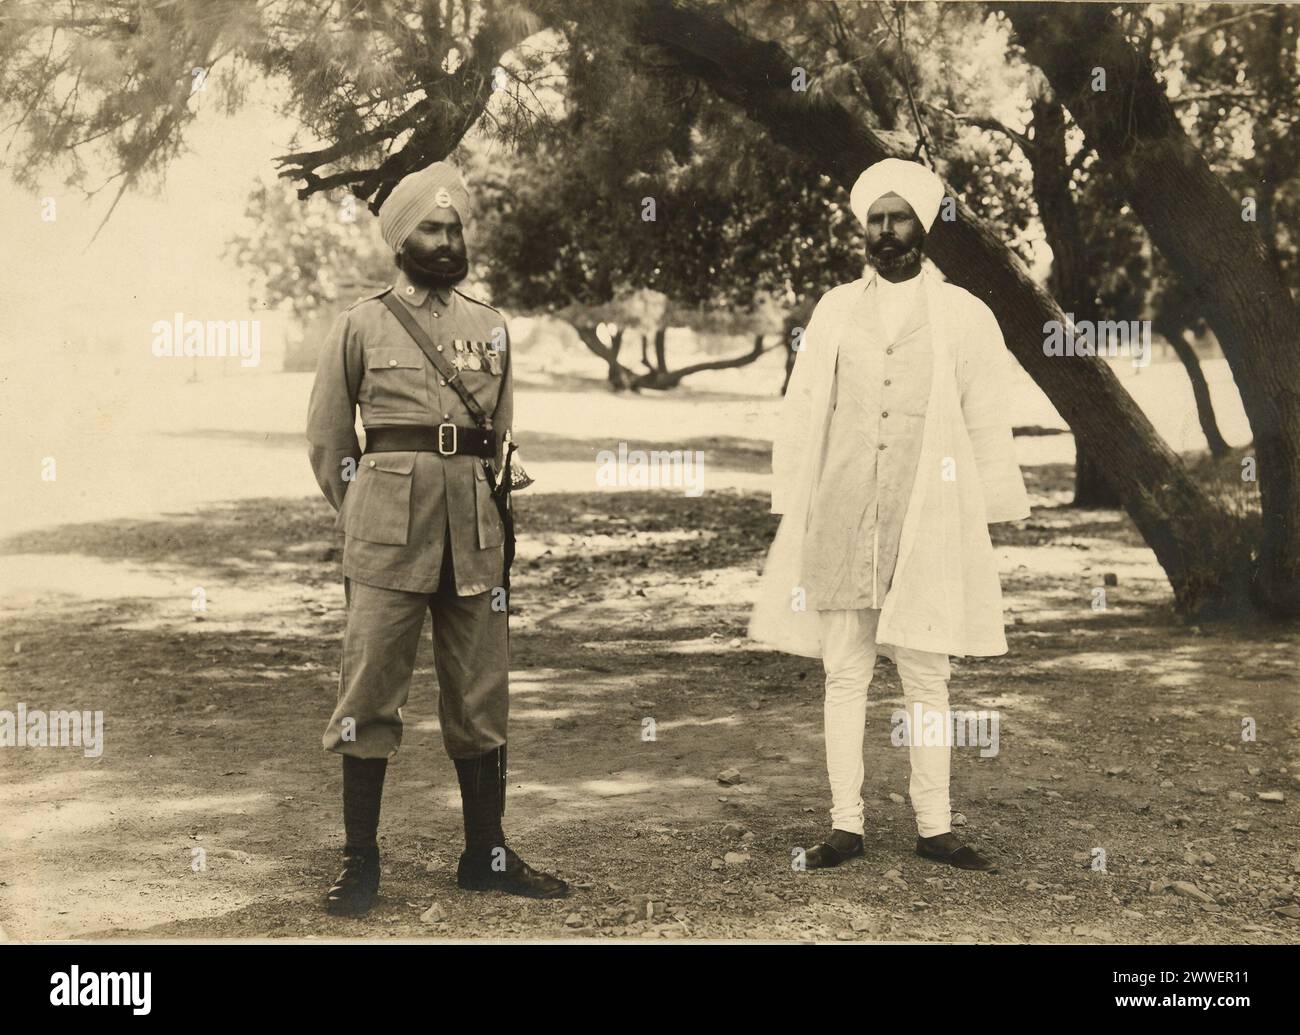 Sikh Indian officers Description: Sikh Indian officers in uniform and mufti Location: North west frontier of India Date: 1933-1935 military Stock Photo